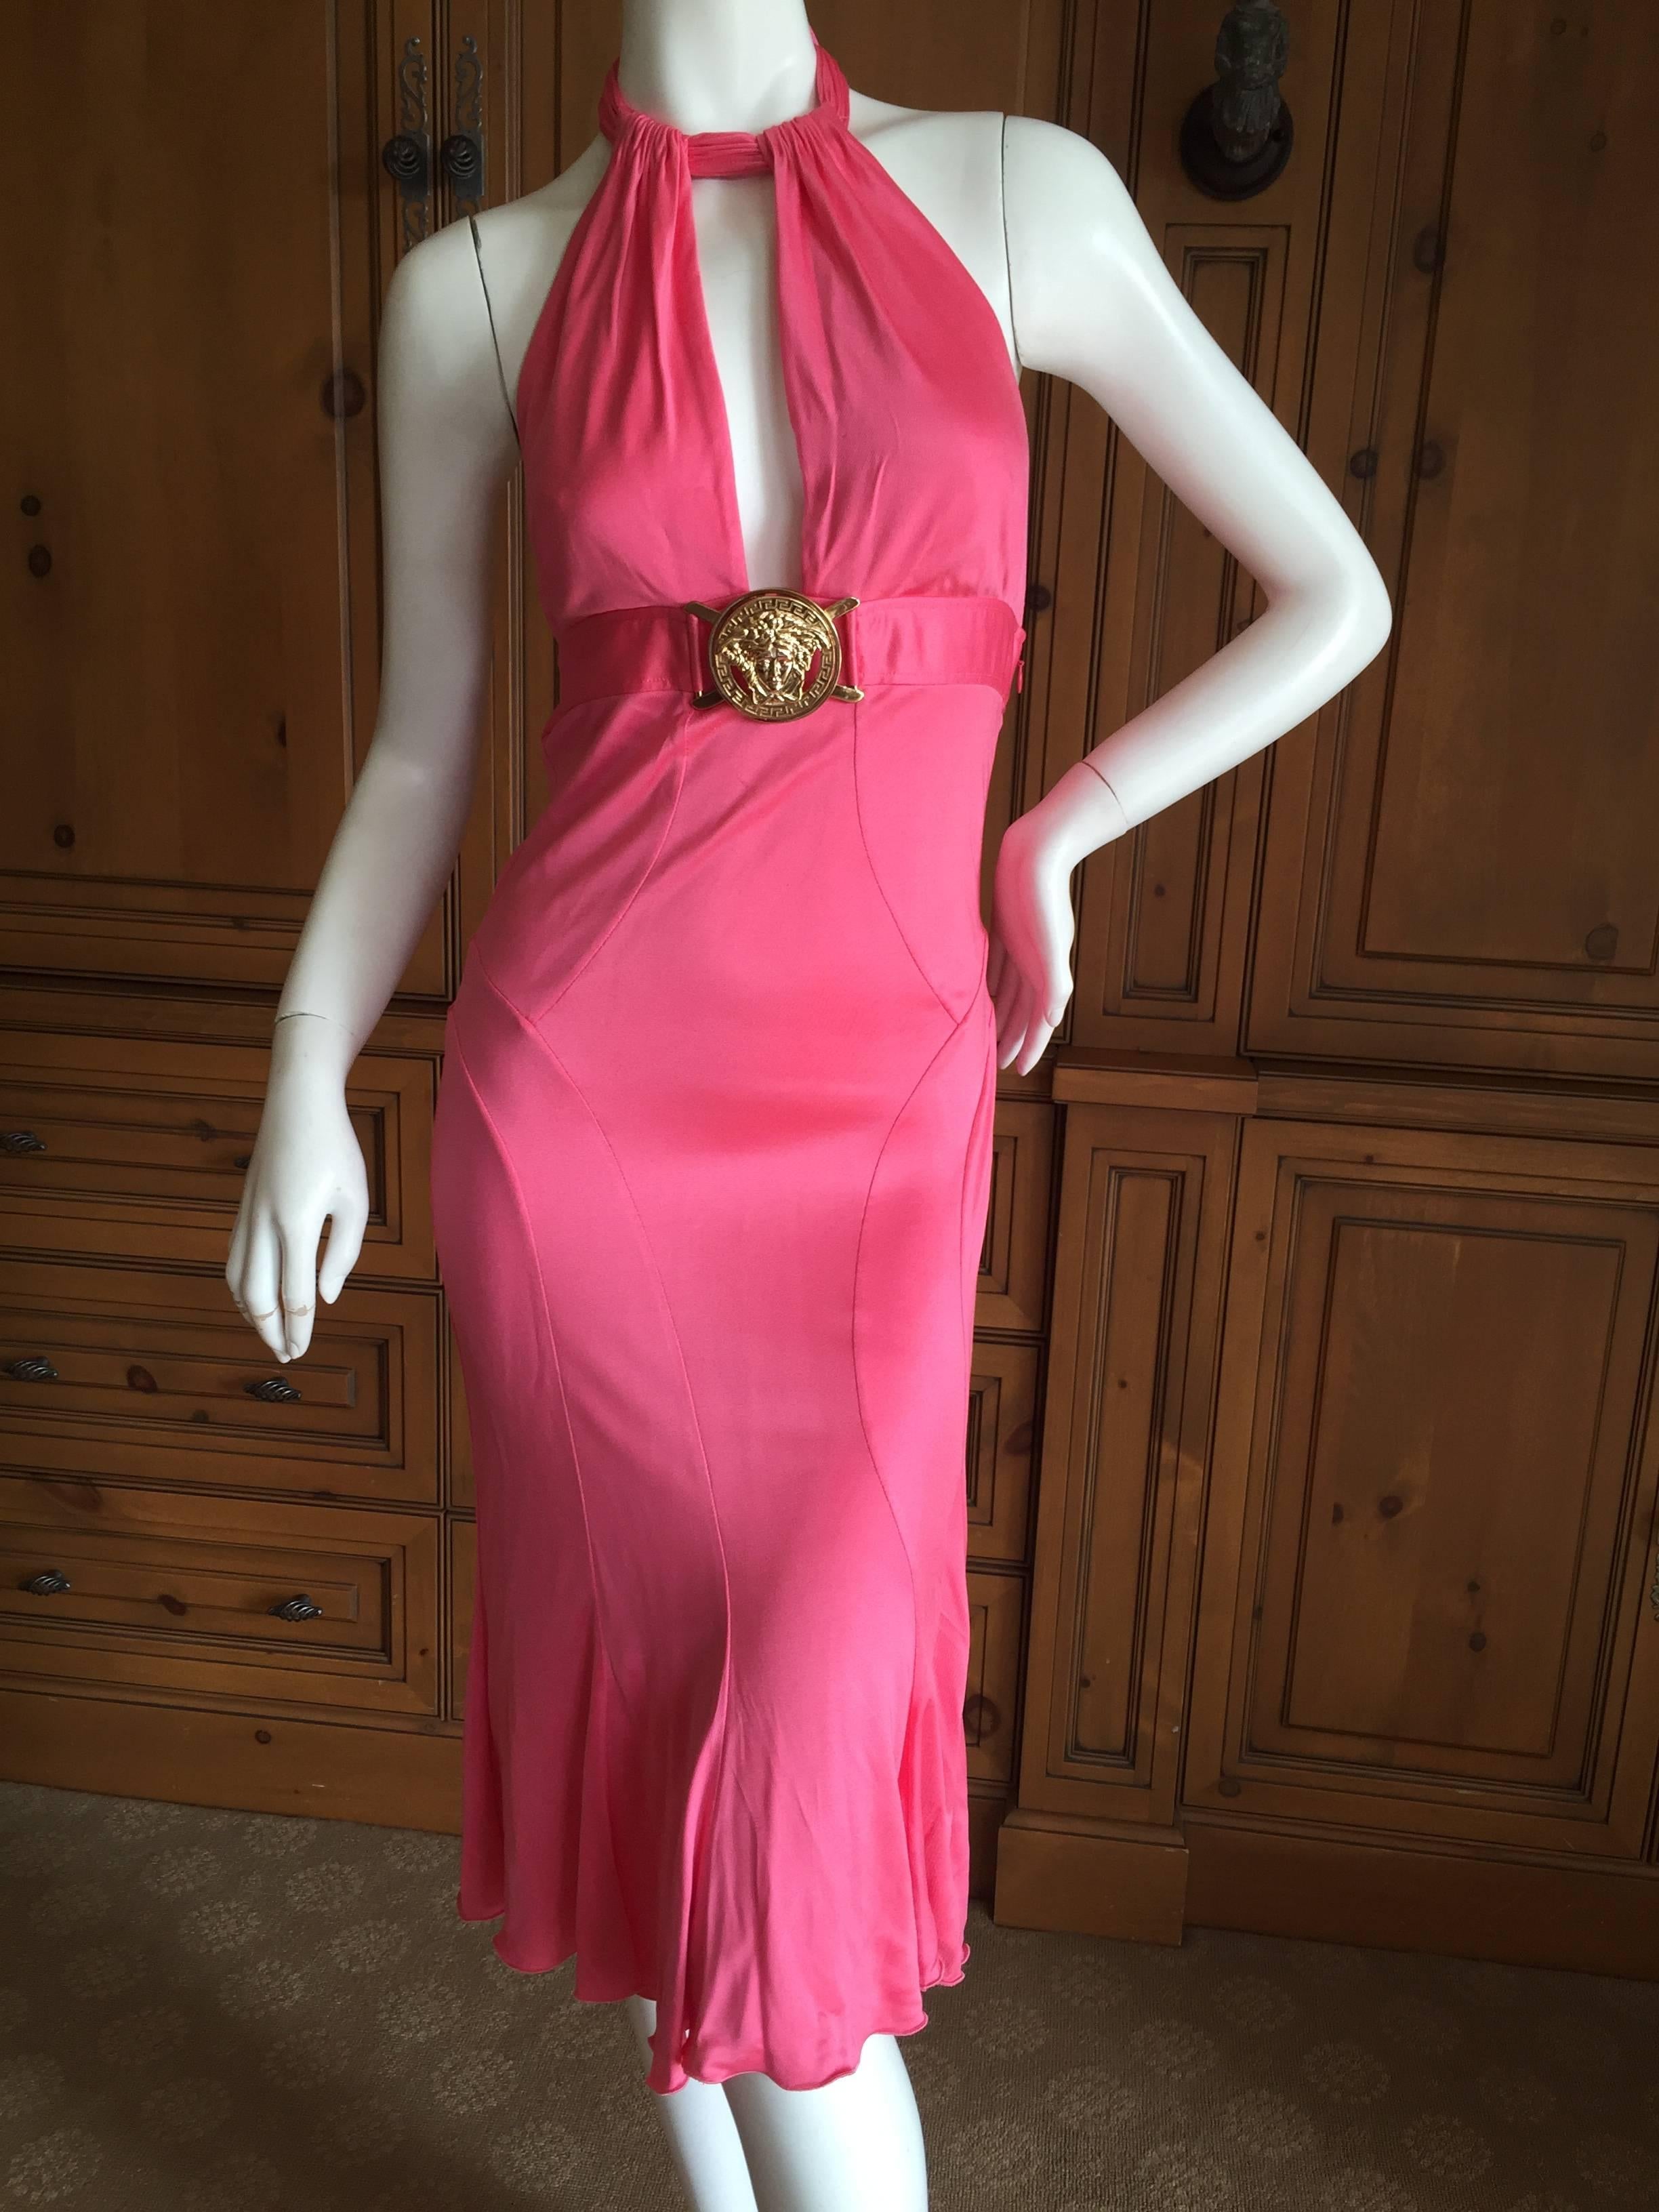 Versace Backless Pink Cocktail Dress with Large Gold Medusa Buckle 2